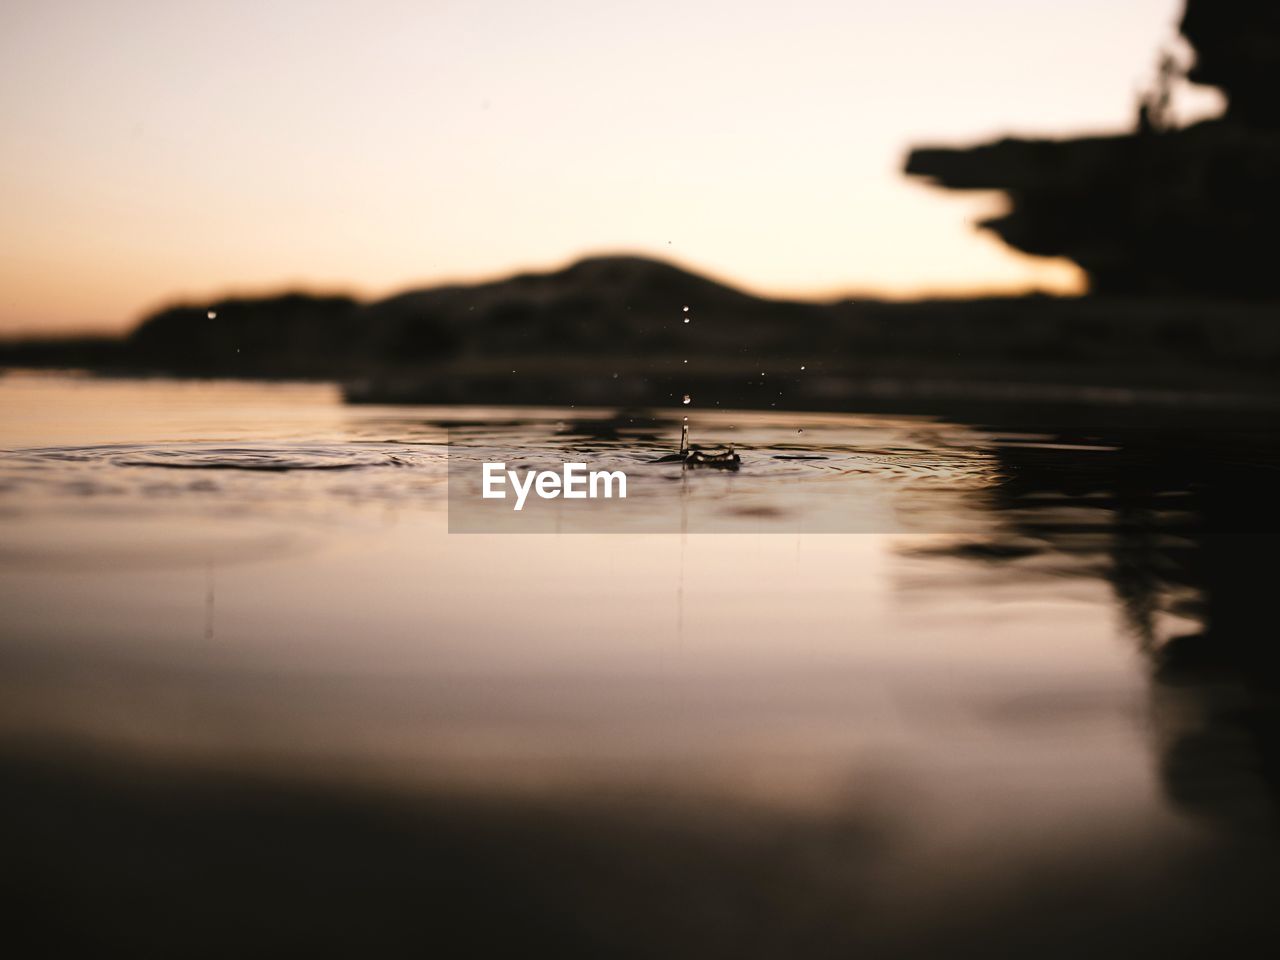 Close-up of drop falling on water at lake against sky during sunset